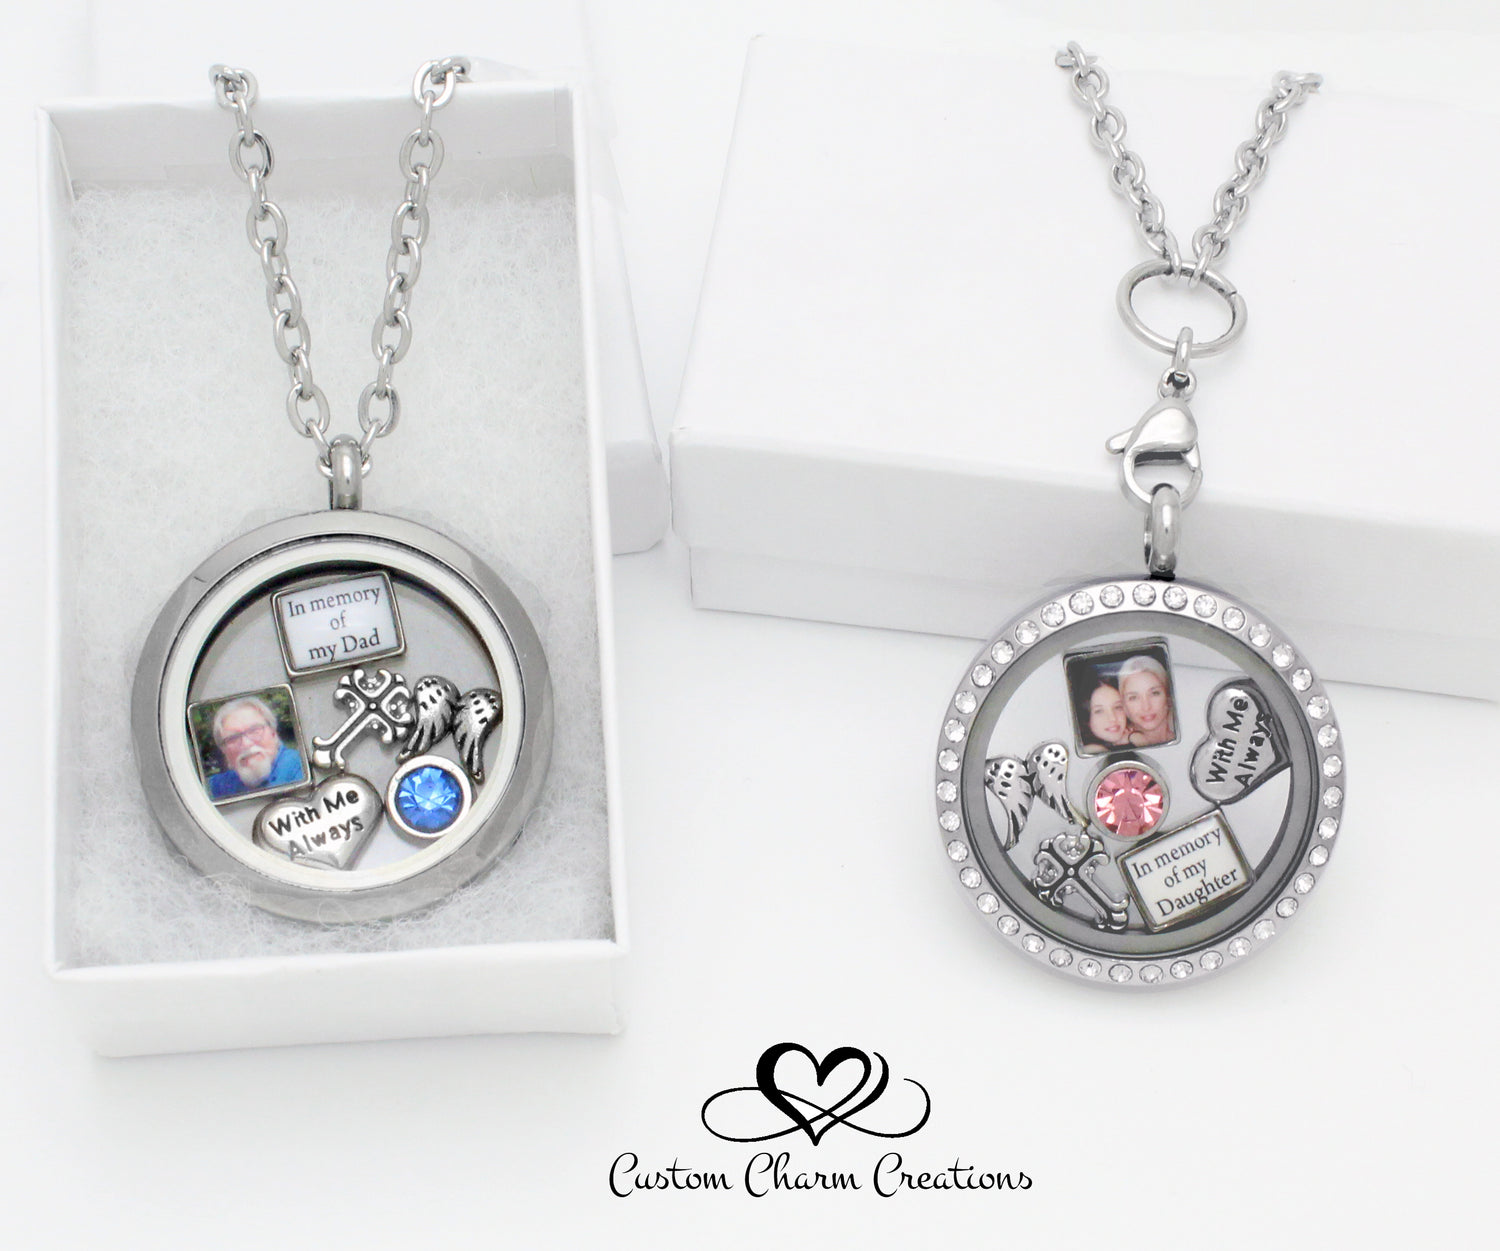 With God All Things Are Possible Stainless Steel Locket Pendant Floating  Charms Necklace - Miracles 